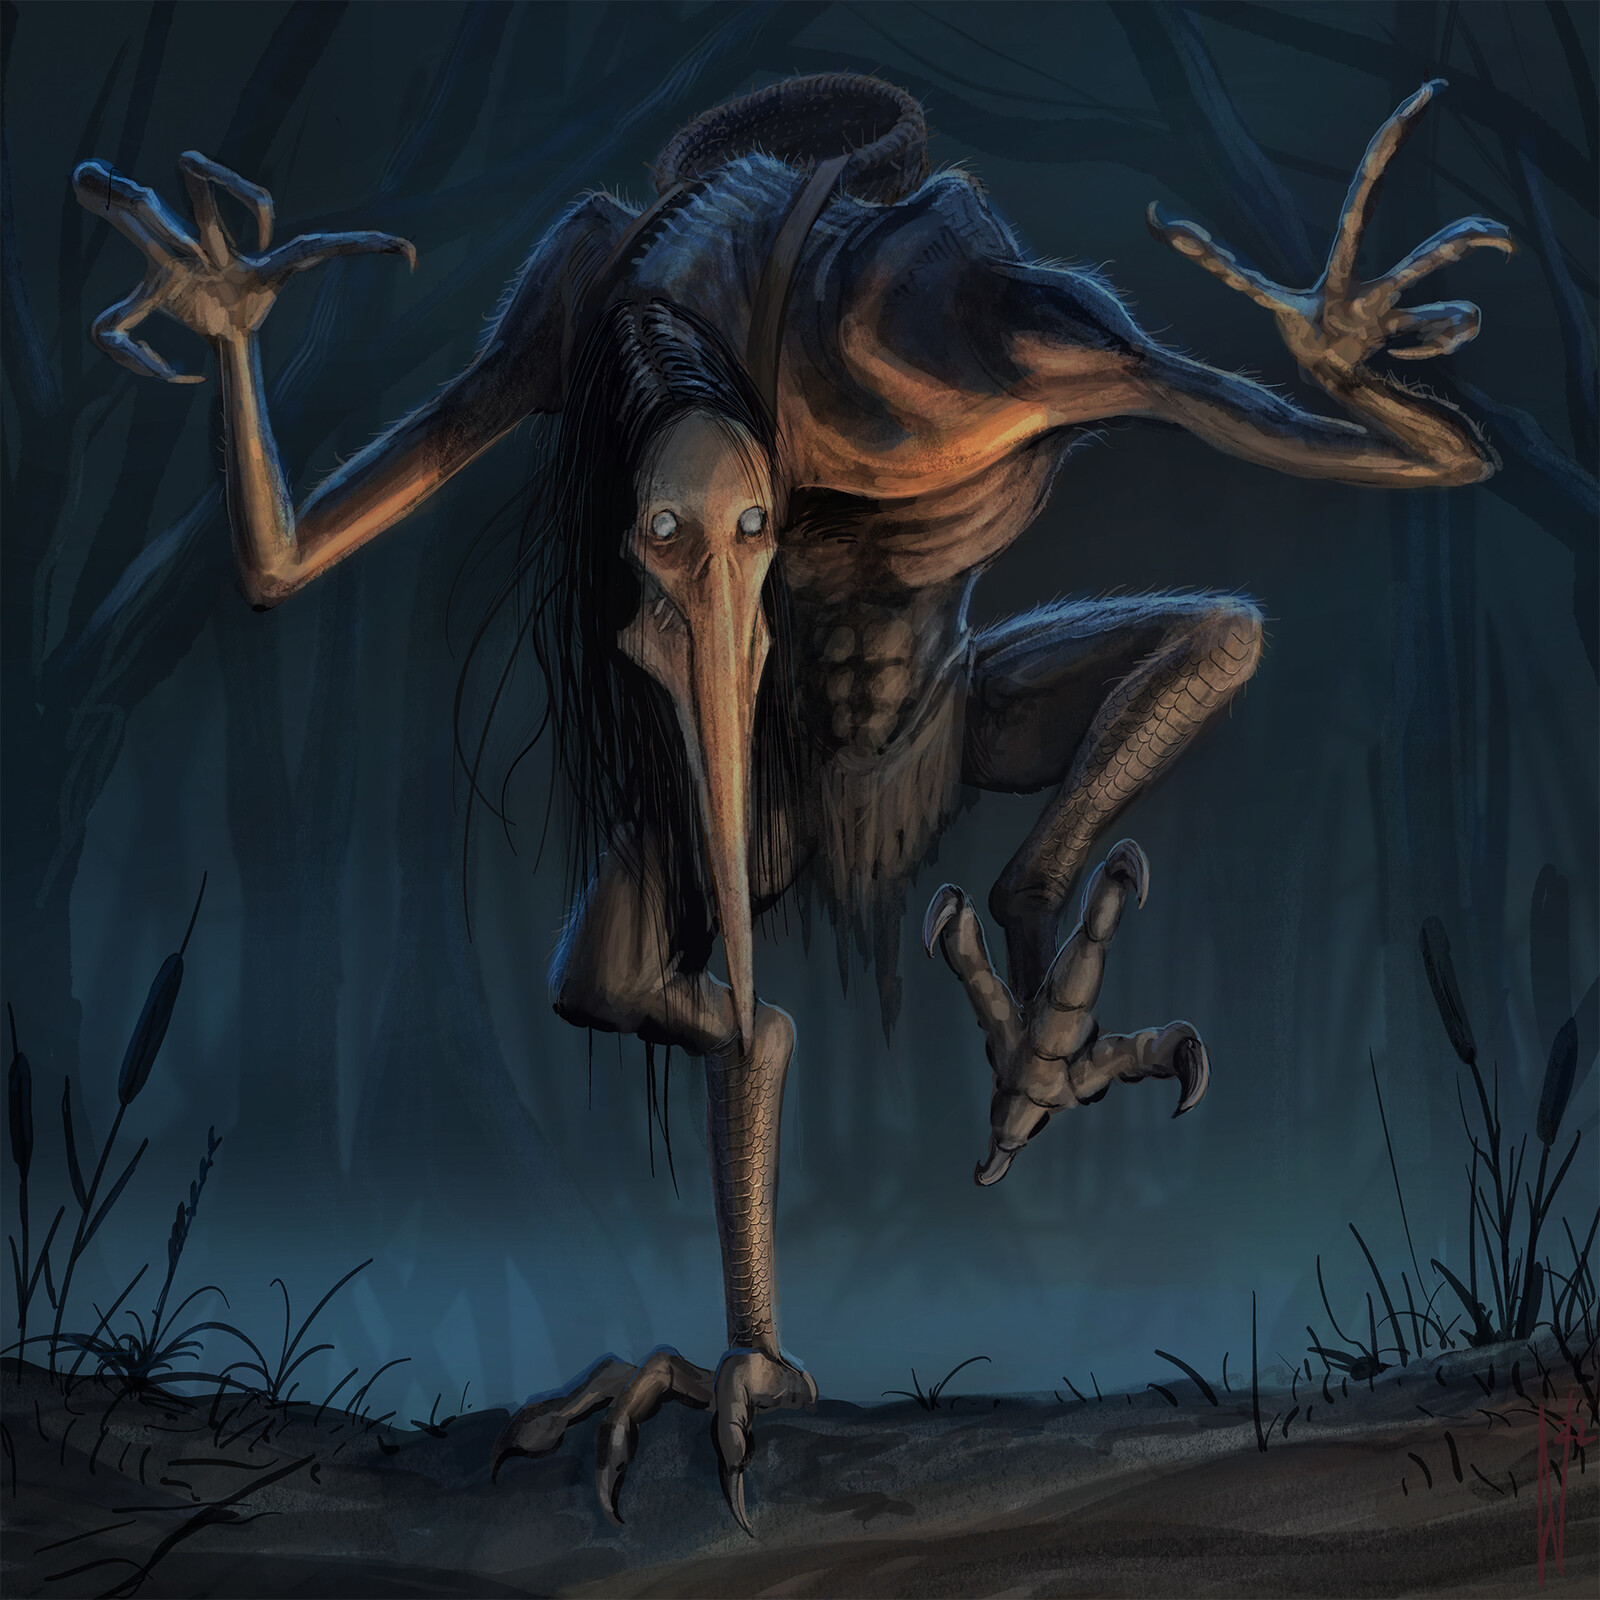 Kikimora - In Slavic mythology, Kikimora is actually a house spirit that appears by making rumbles and producing chaos. It is mostly described as humanoid, but also very often depicted with bird-like features.